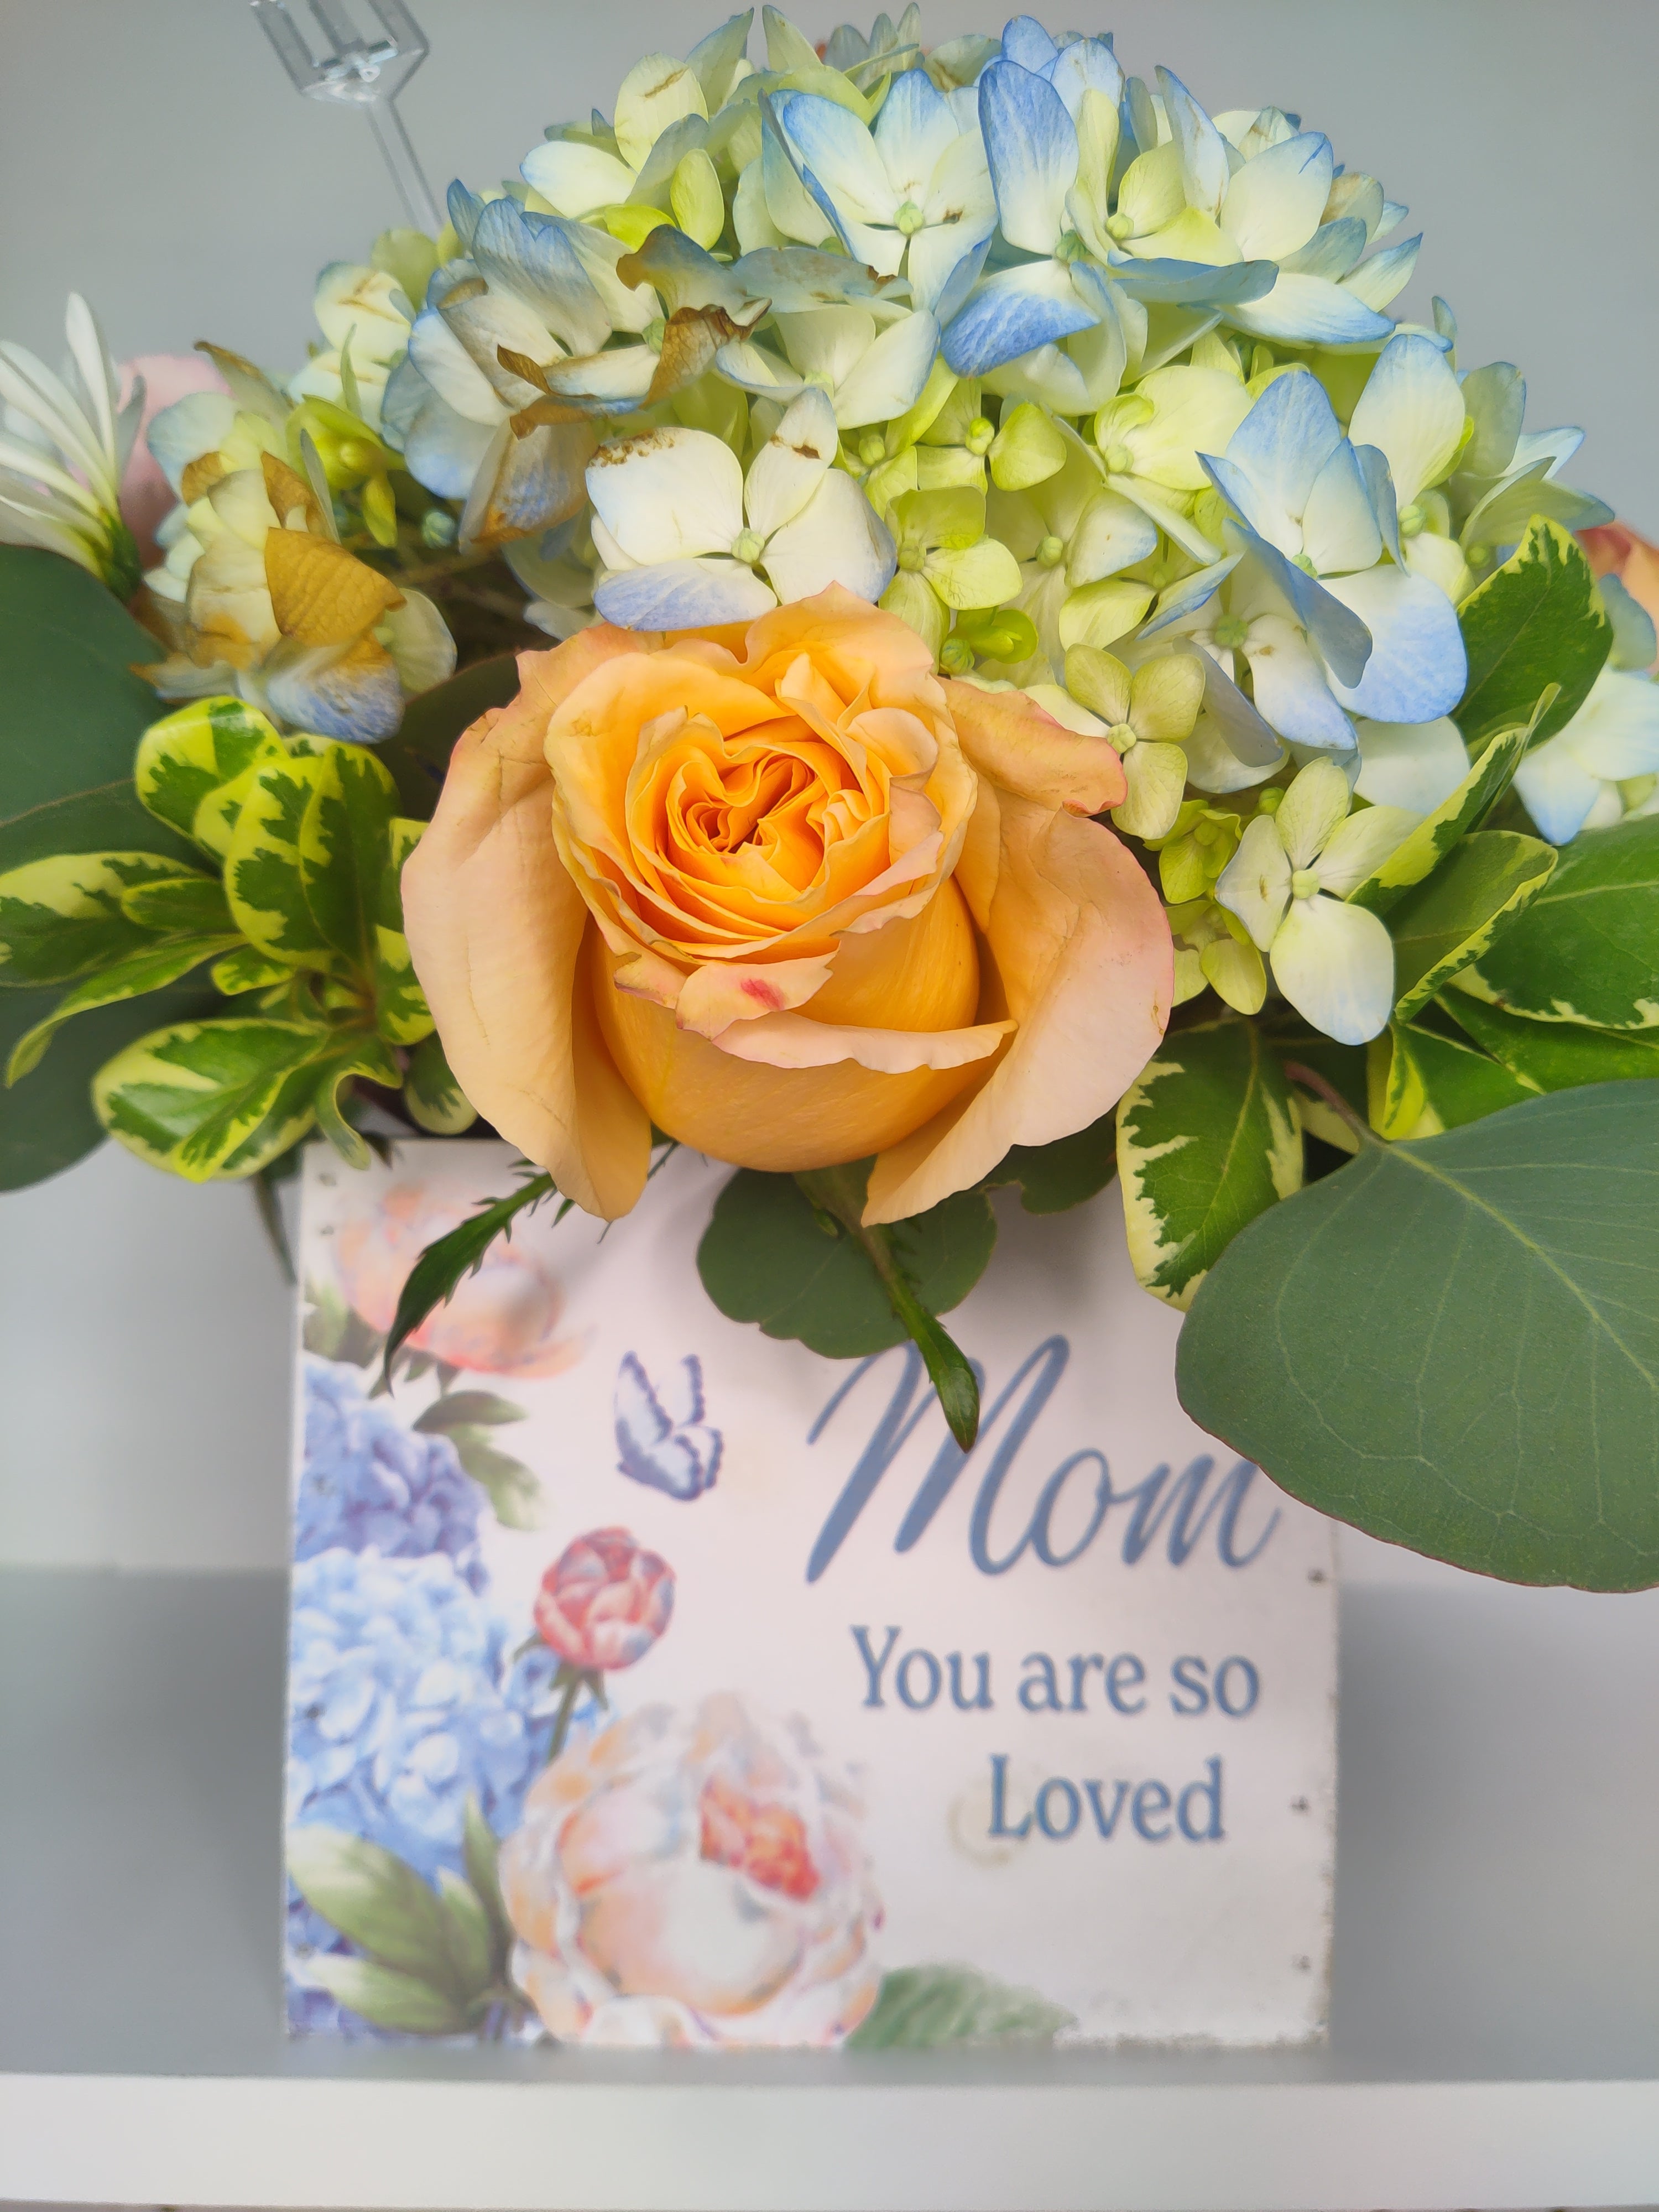 Mom you are so loved... Floral planter Arrangement |Mother's Day